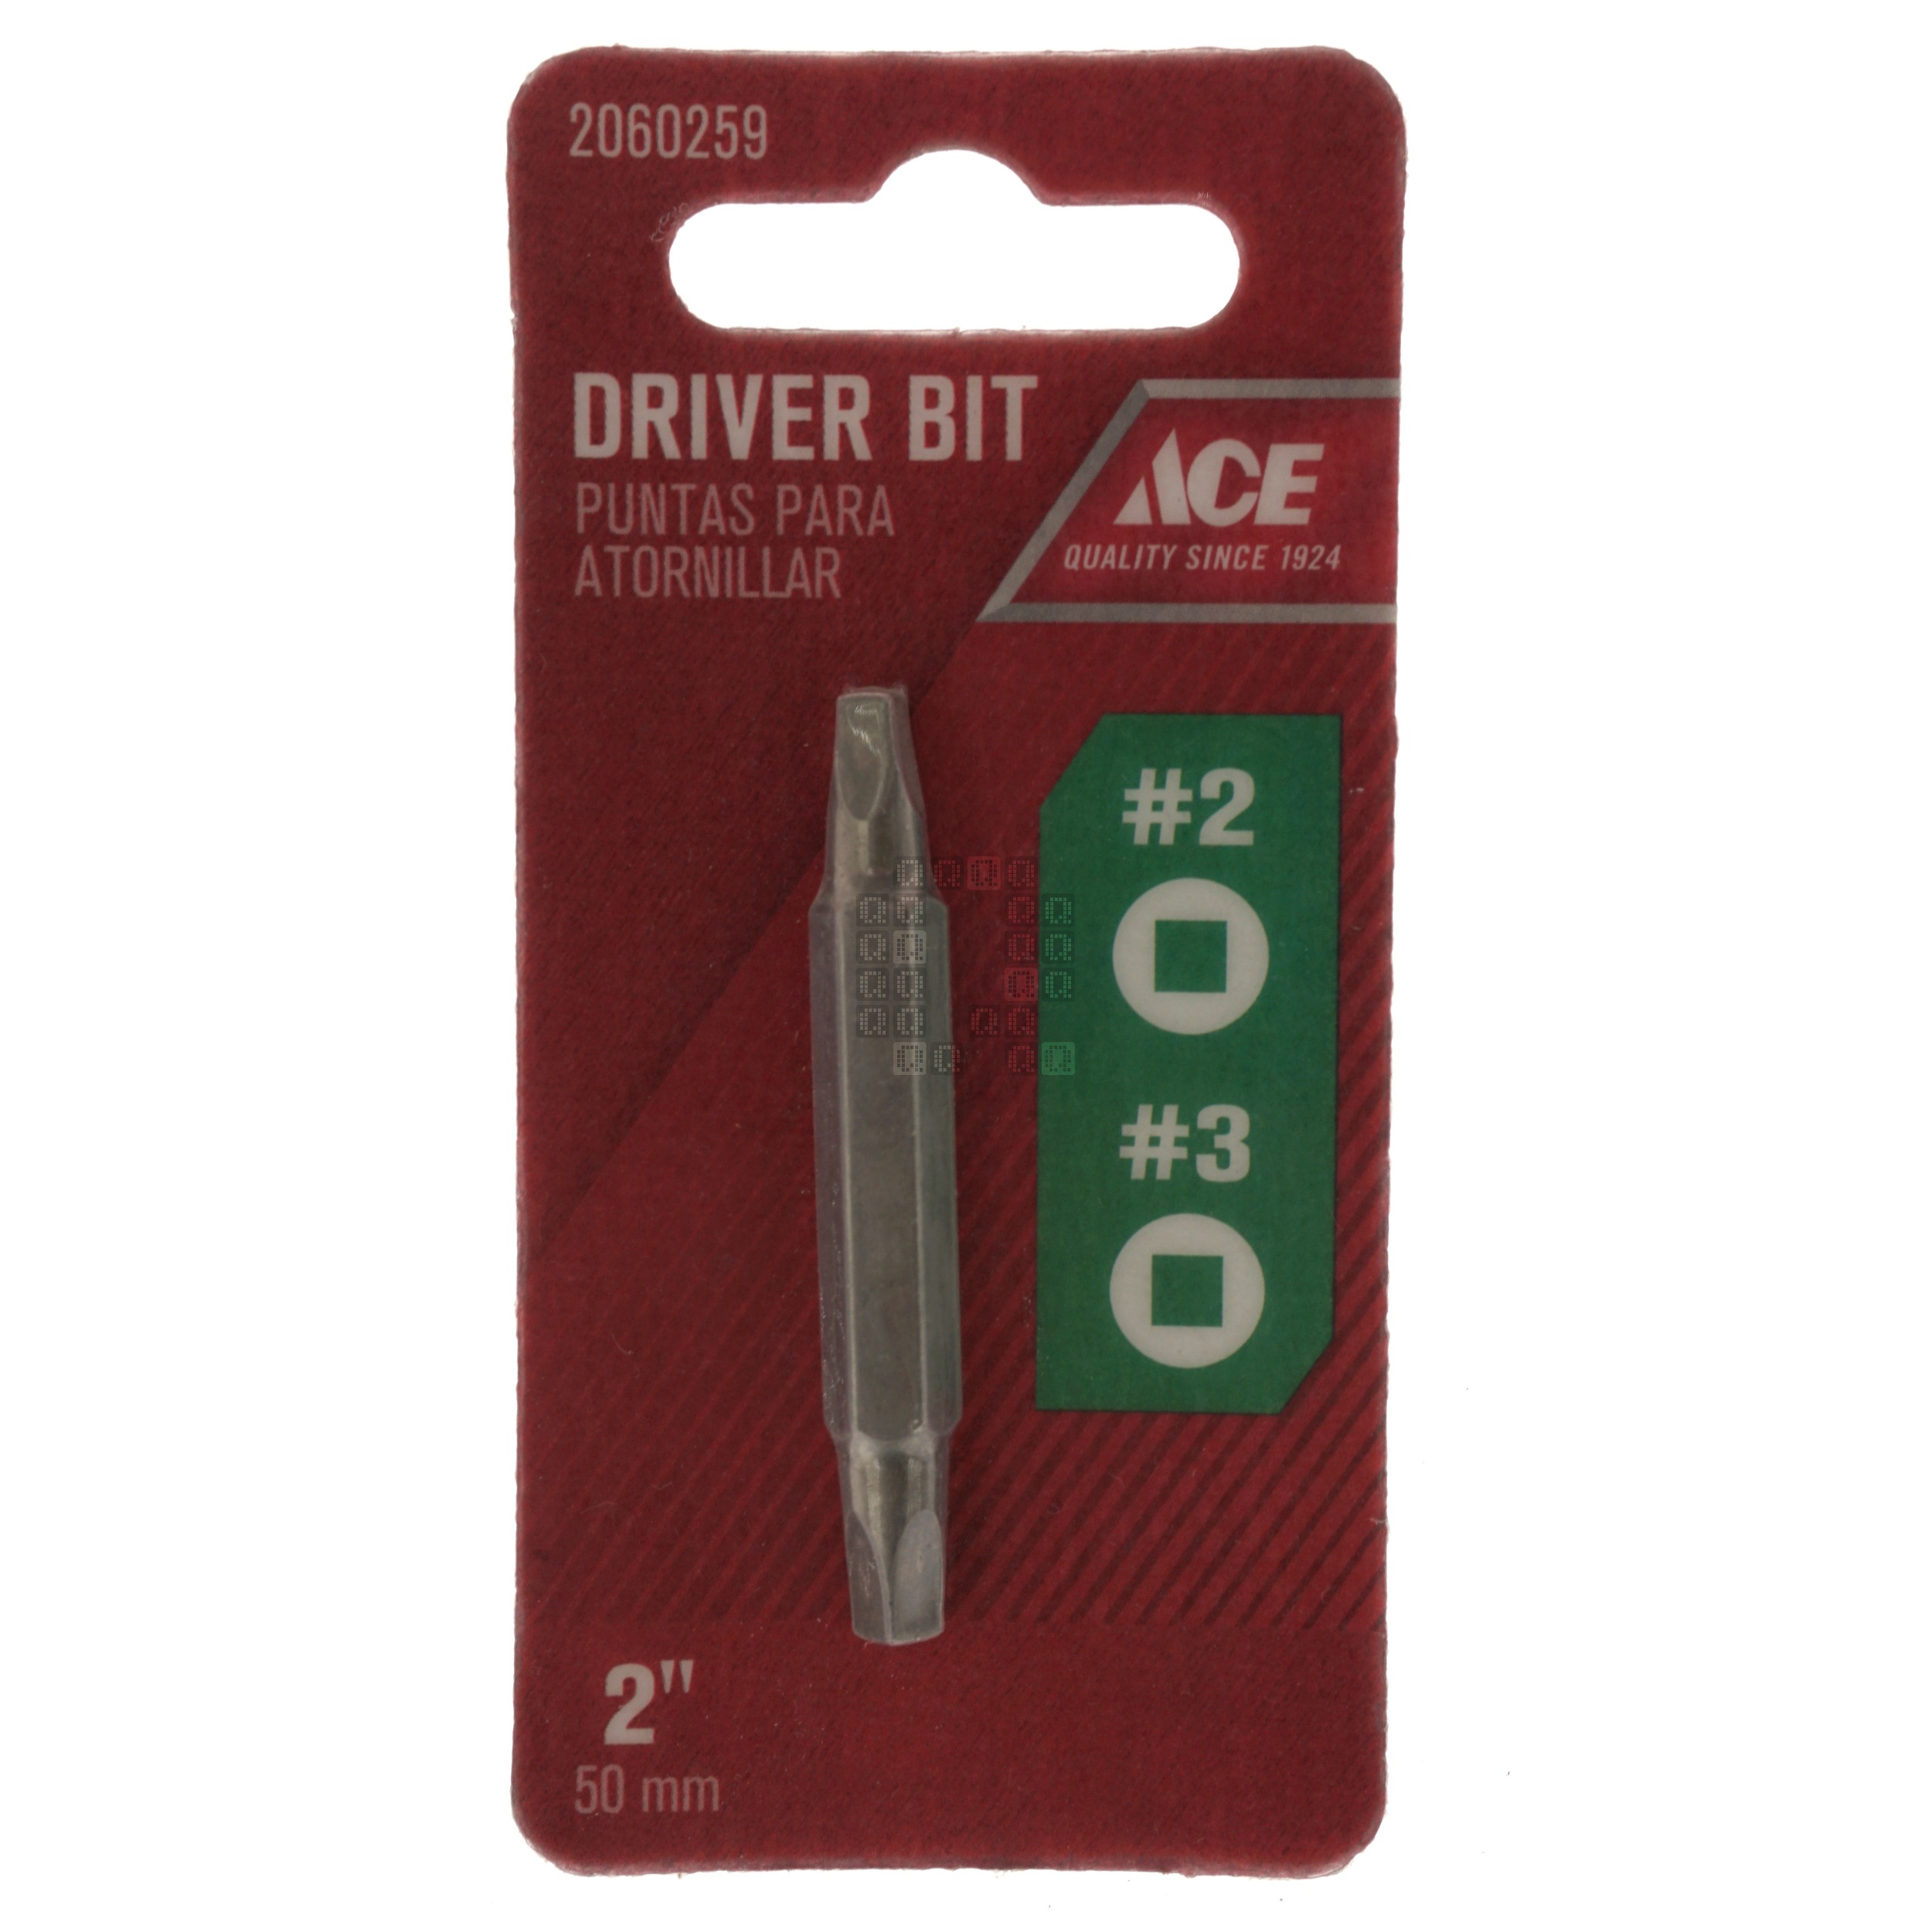 ACE Hardware 2060259 #2 Square SQ2 / #3 Square SQ3 Double Ended Driver Bit, 2" Length